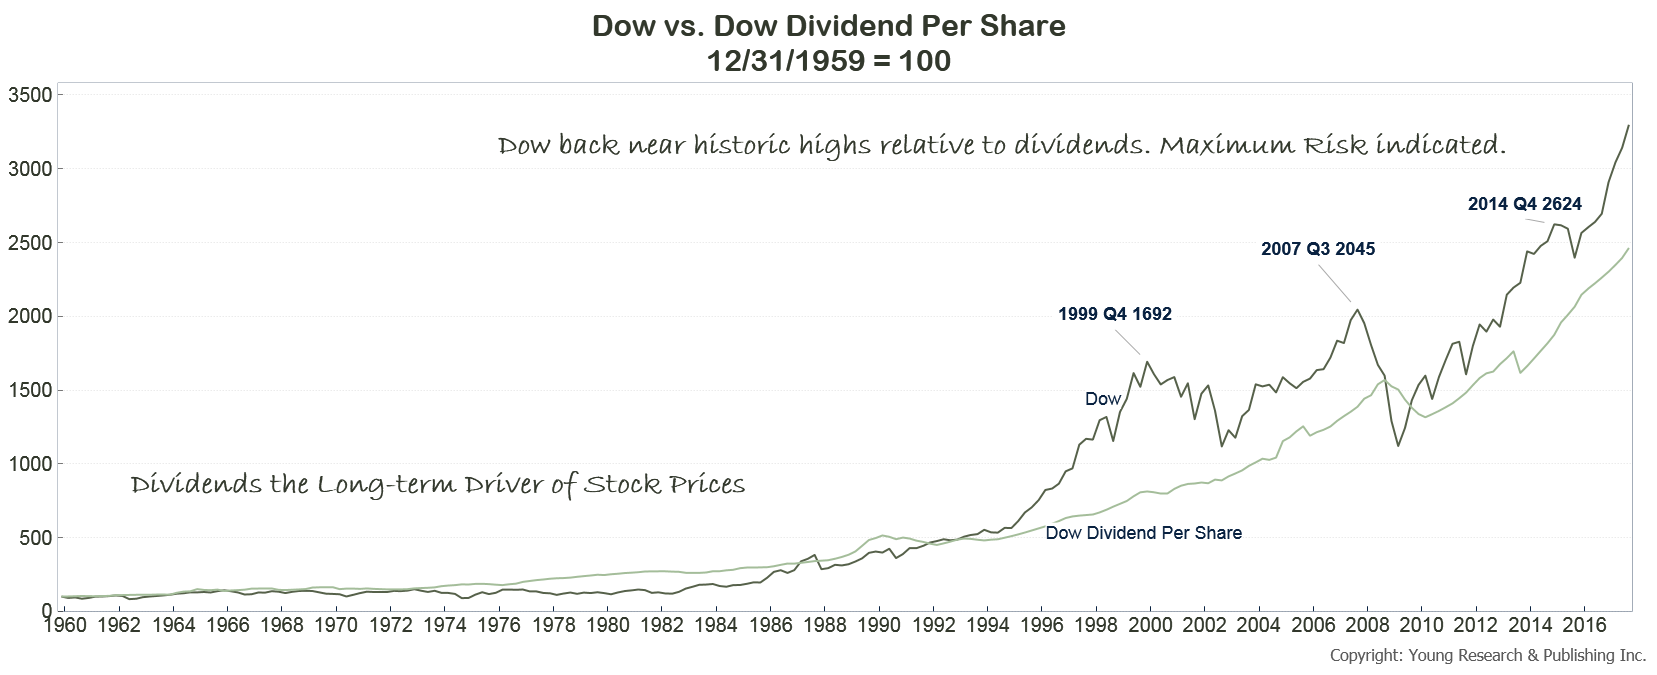 Dow vs. Dow Dividend Per Share Young's World Money Forecast